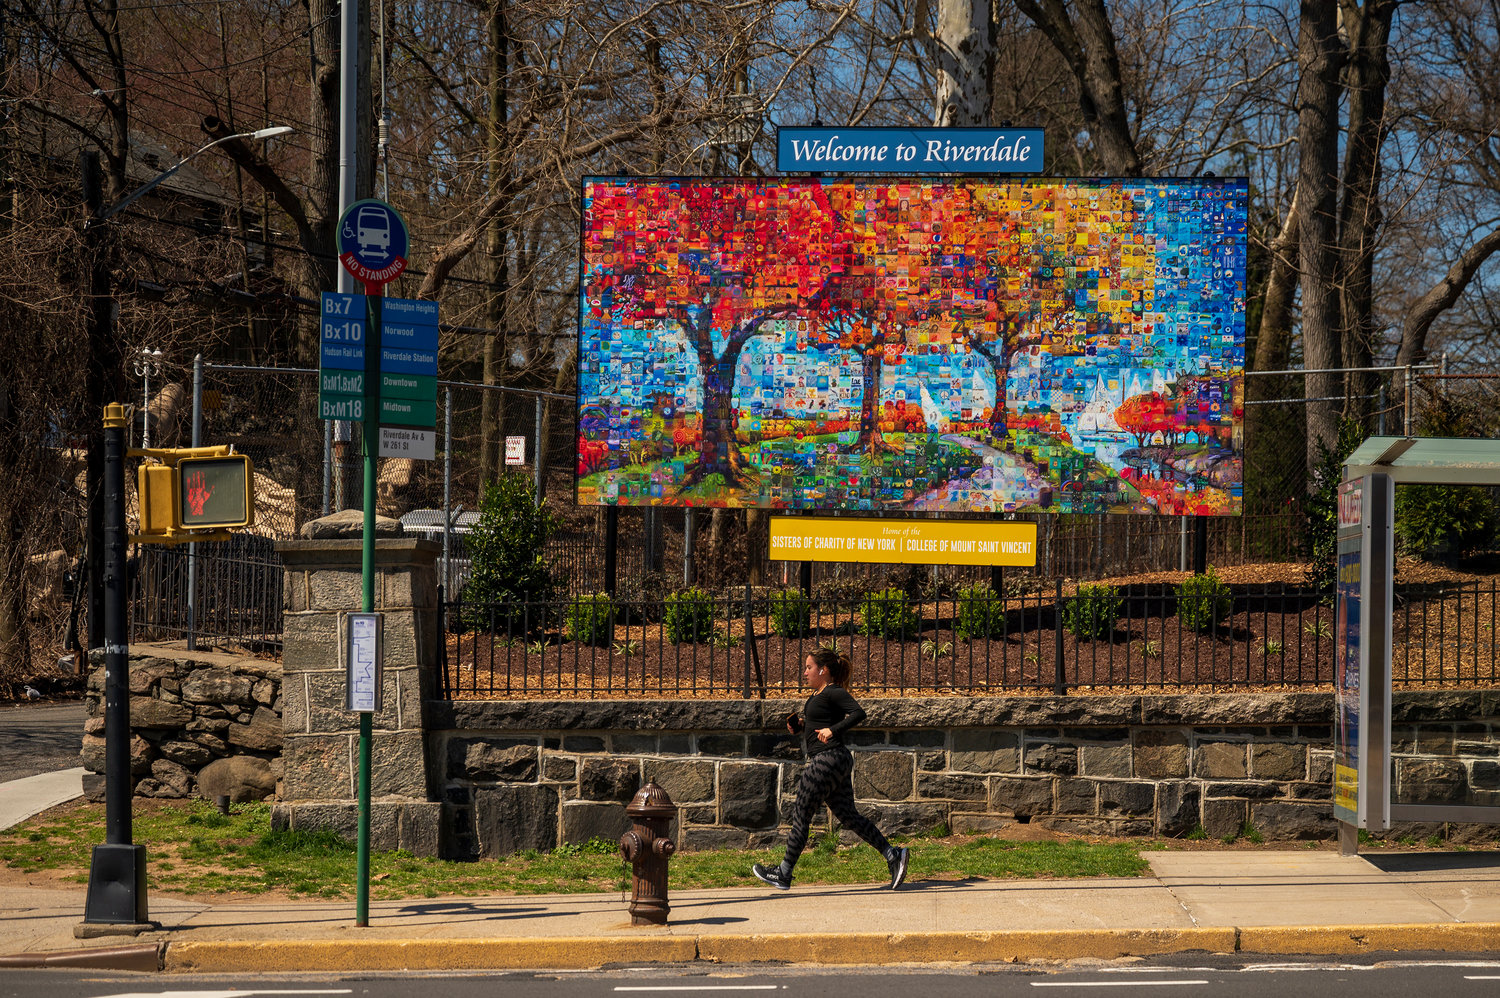 A new 10-foot high mosaic mural made of about 2,000 tiles faces Riverdale Avenue from the campus of the College of Mount Saint Vincent. It is a collaboration of the Riverdale Main Streets Alliance, the Sisters of Charity and the college. Each tile is painted with a face, object, animal or other things that depict the Northeast in the fall.